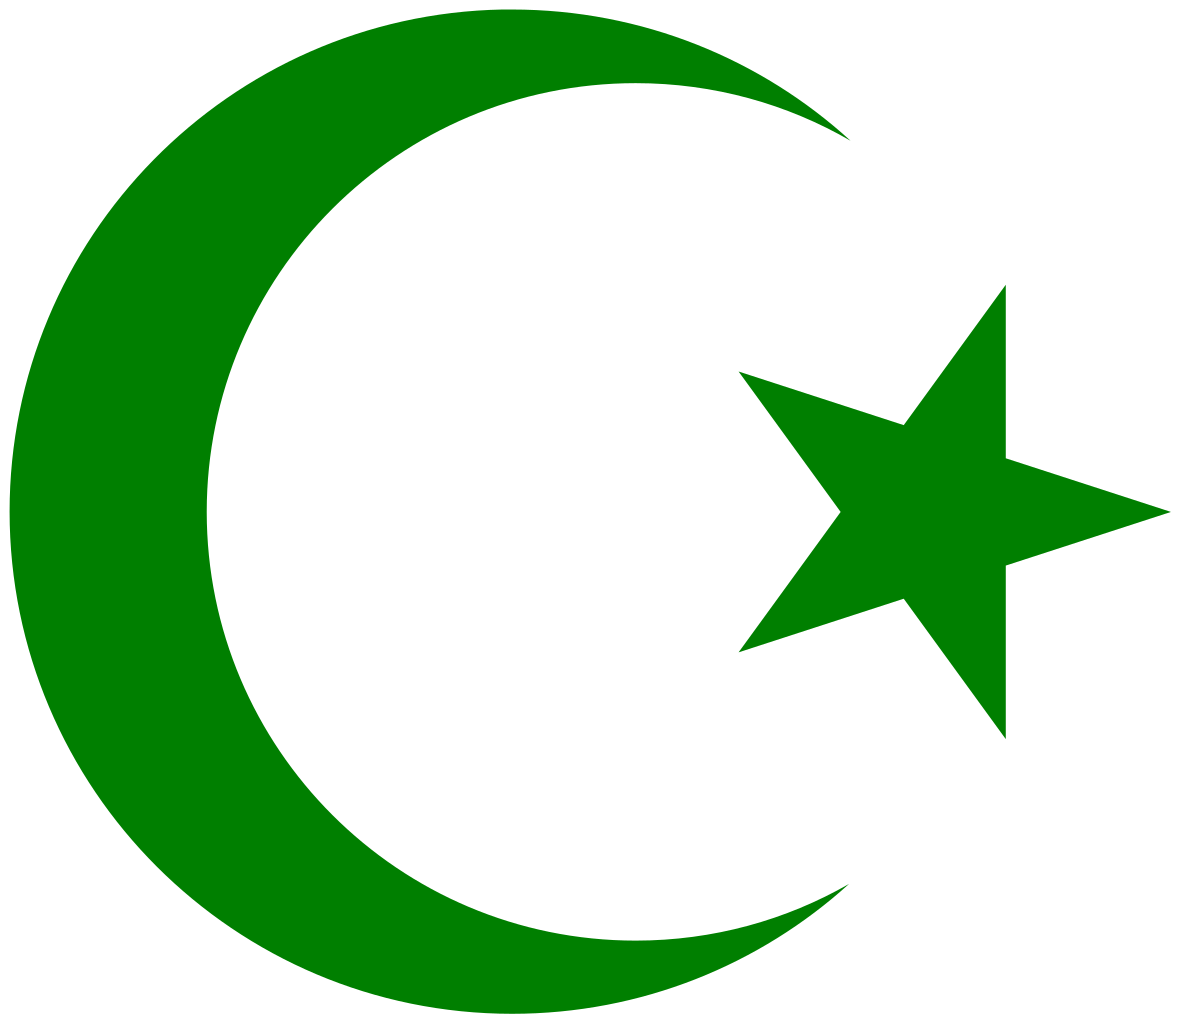 1181px-Star_and_Crescent.svg.png